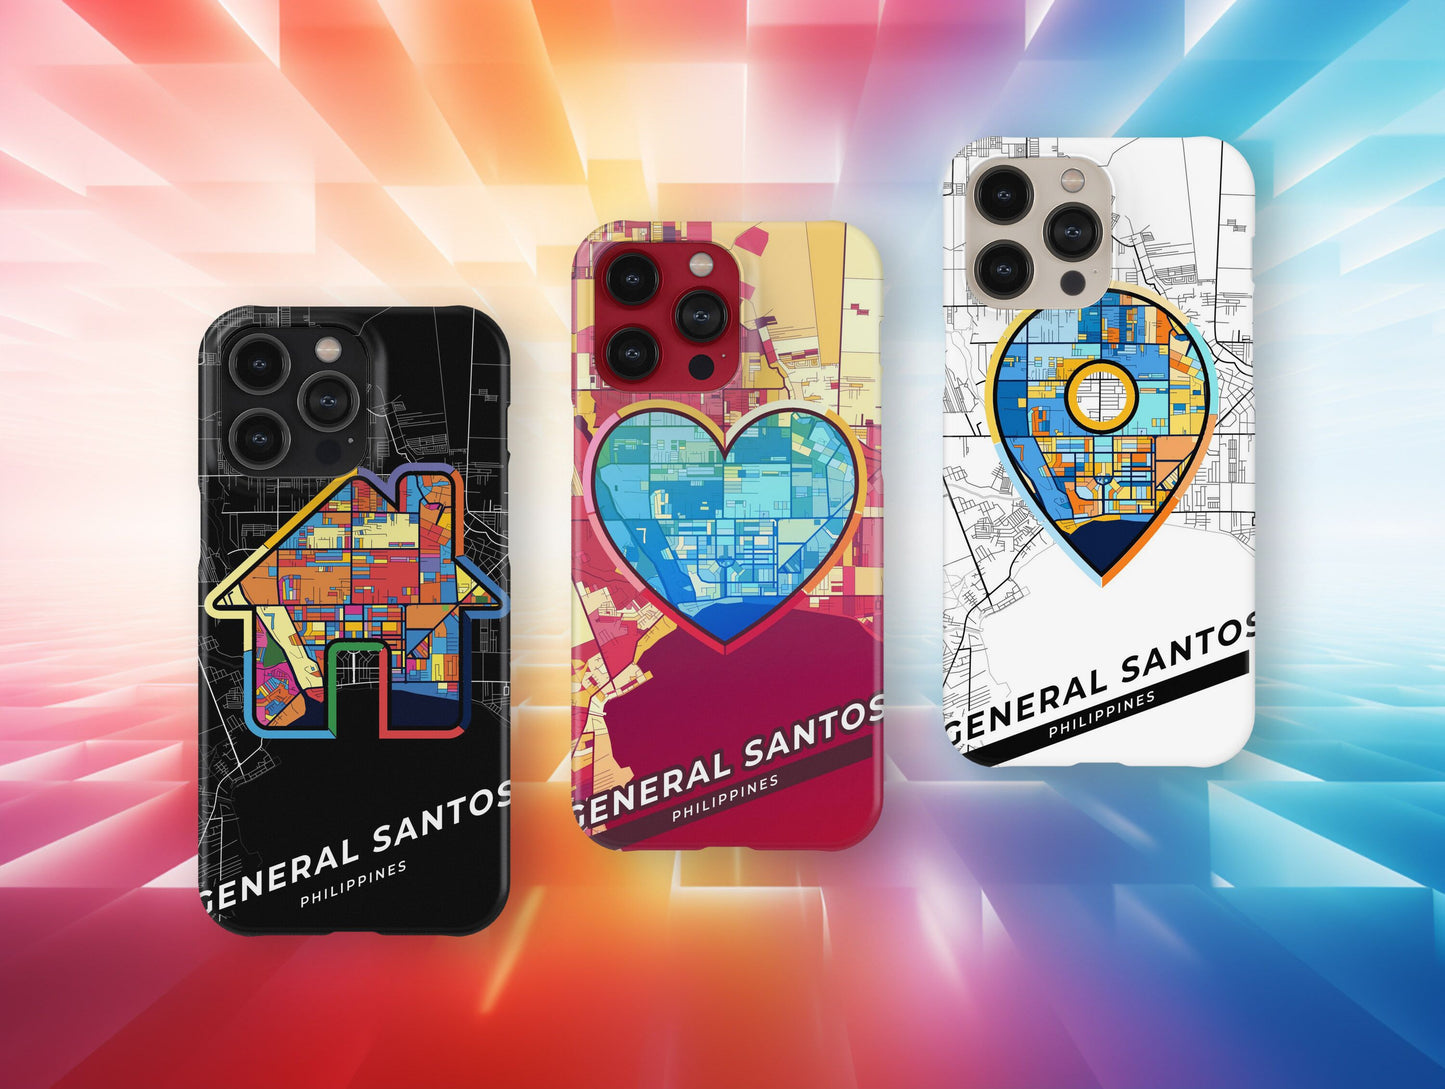 General Santos Philippines slim phone case with colorful icon. Birthday, wedding or housewarming gift. Couple match cases.